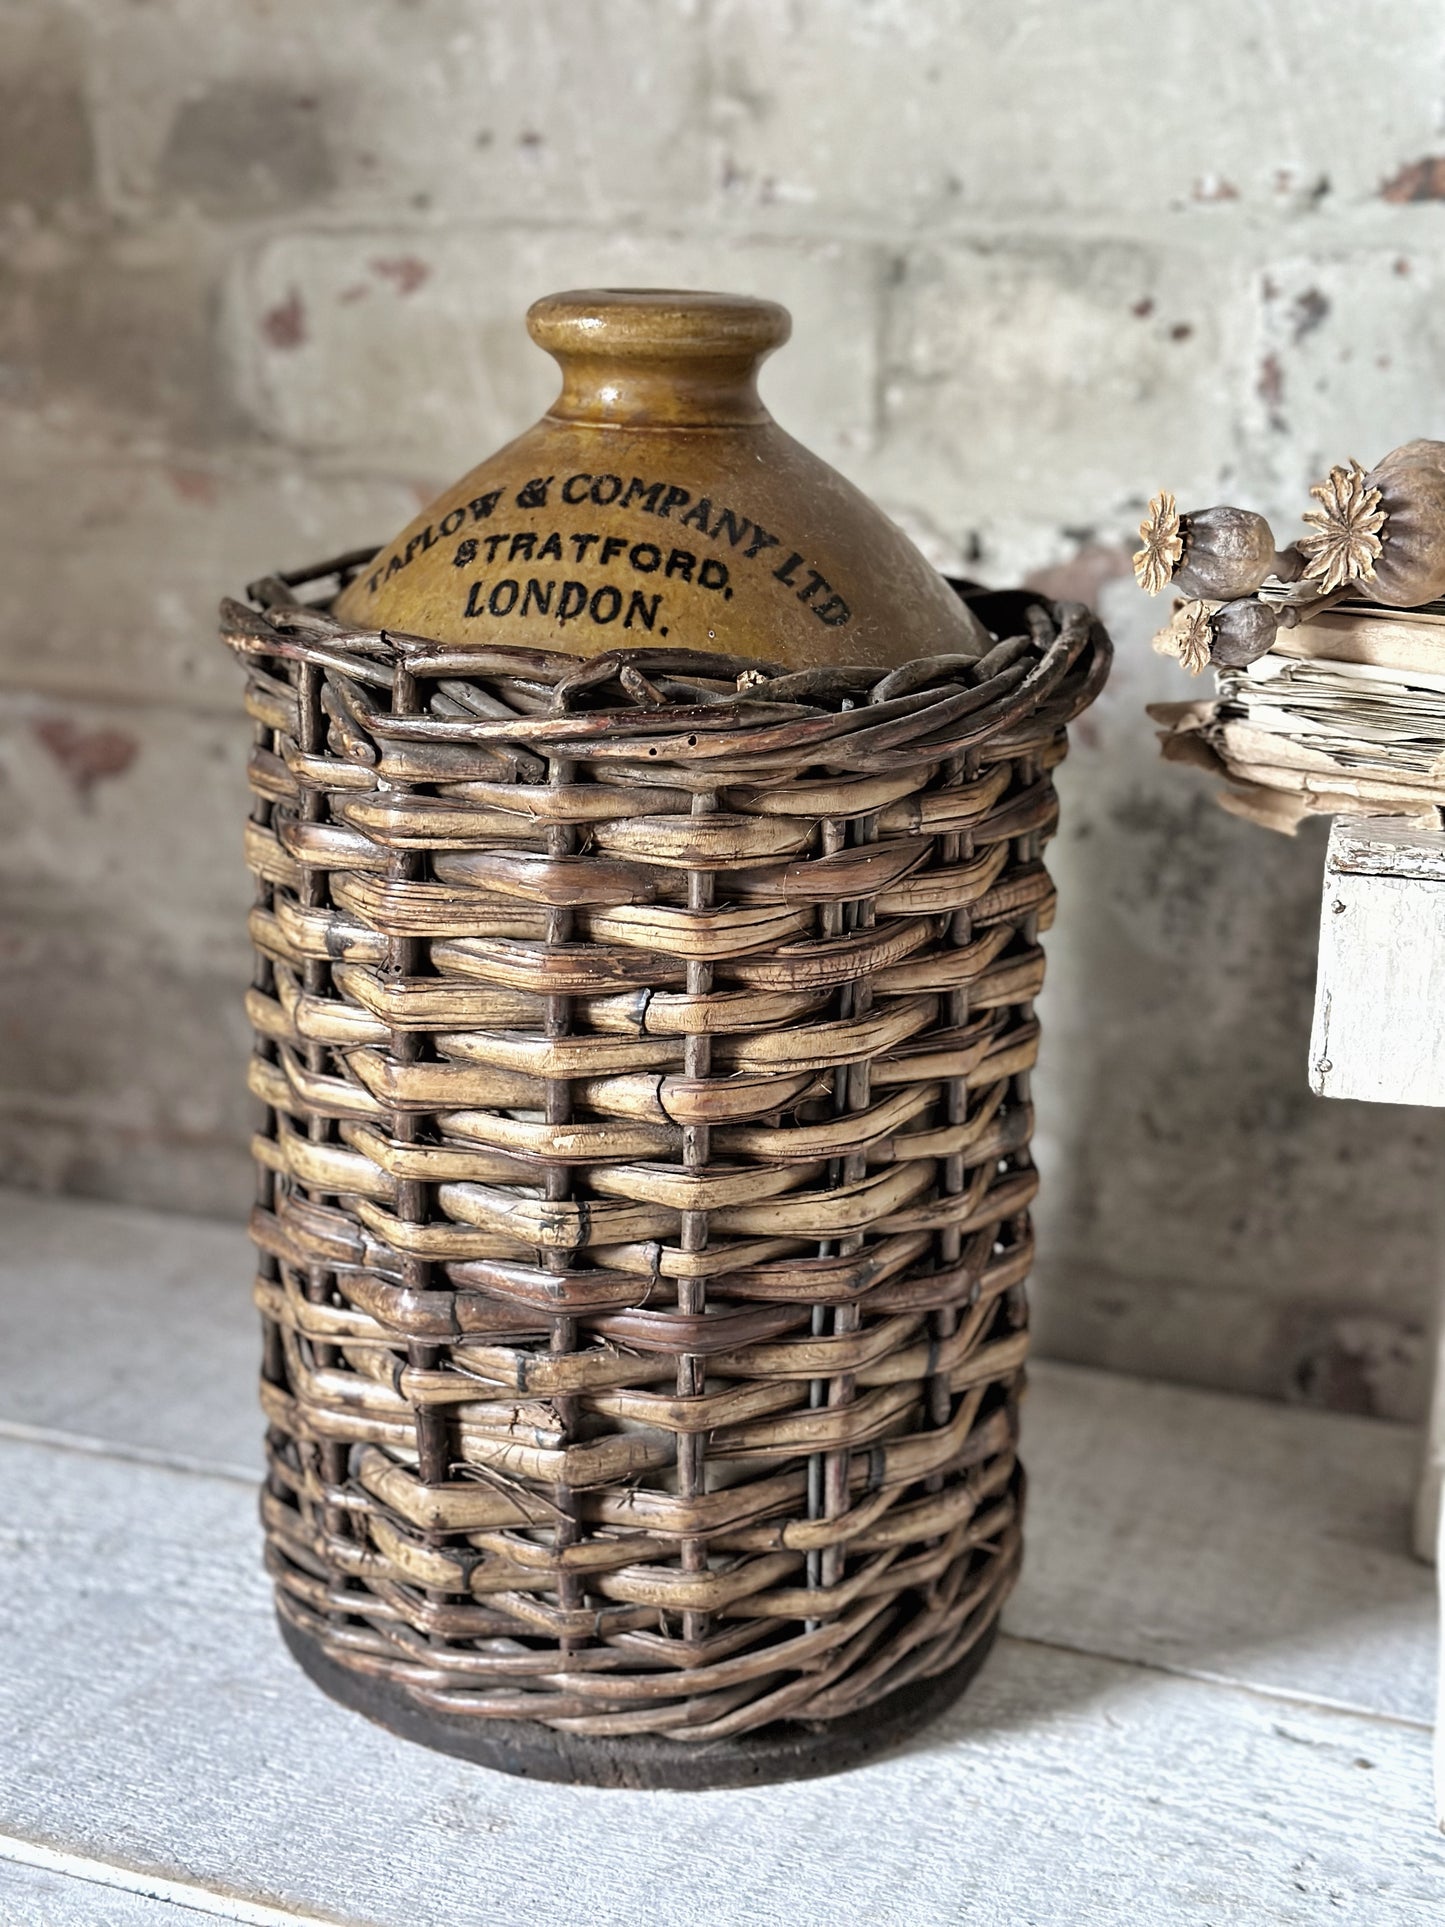 Incredible large wicker wine bottle “Taplow & Company Ltd. Stratford” by Skey Tamworth